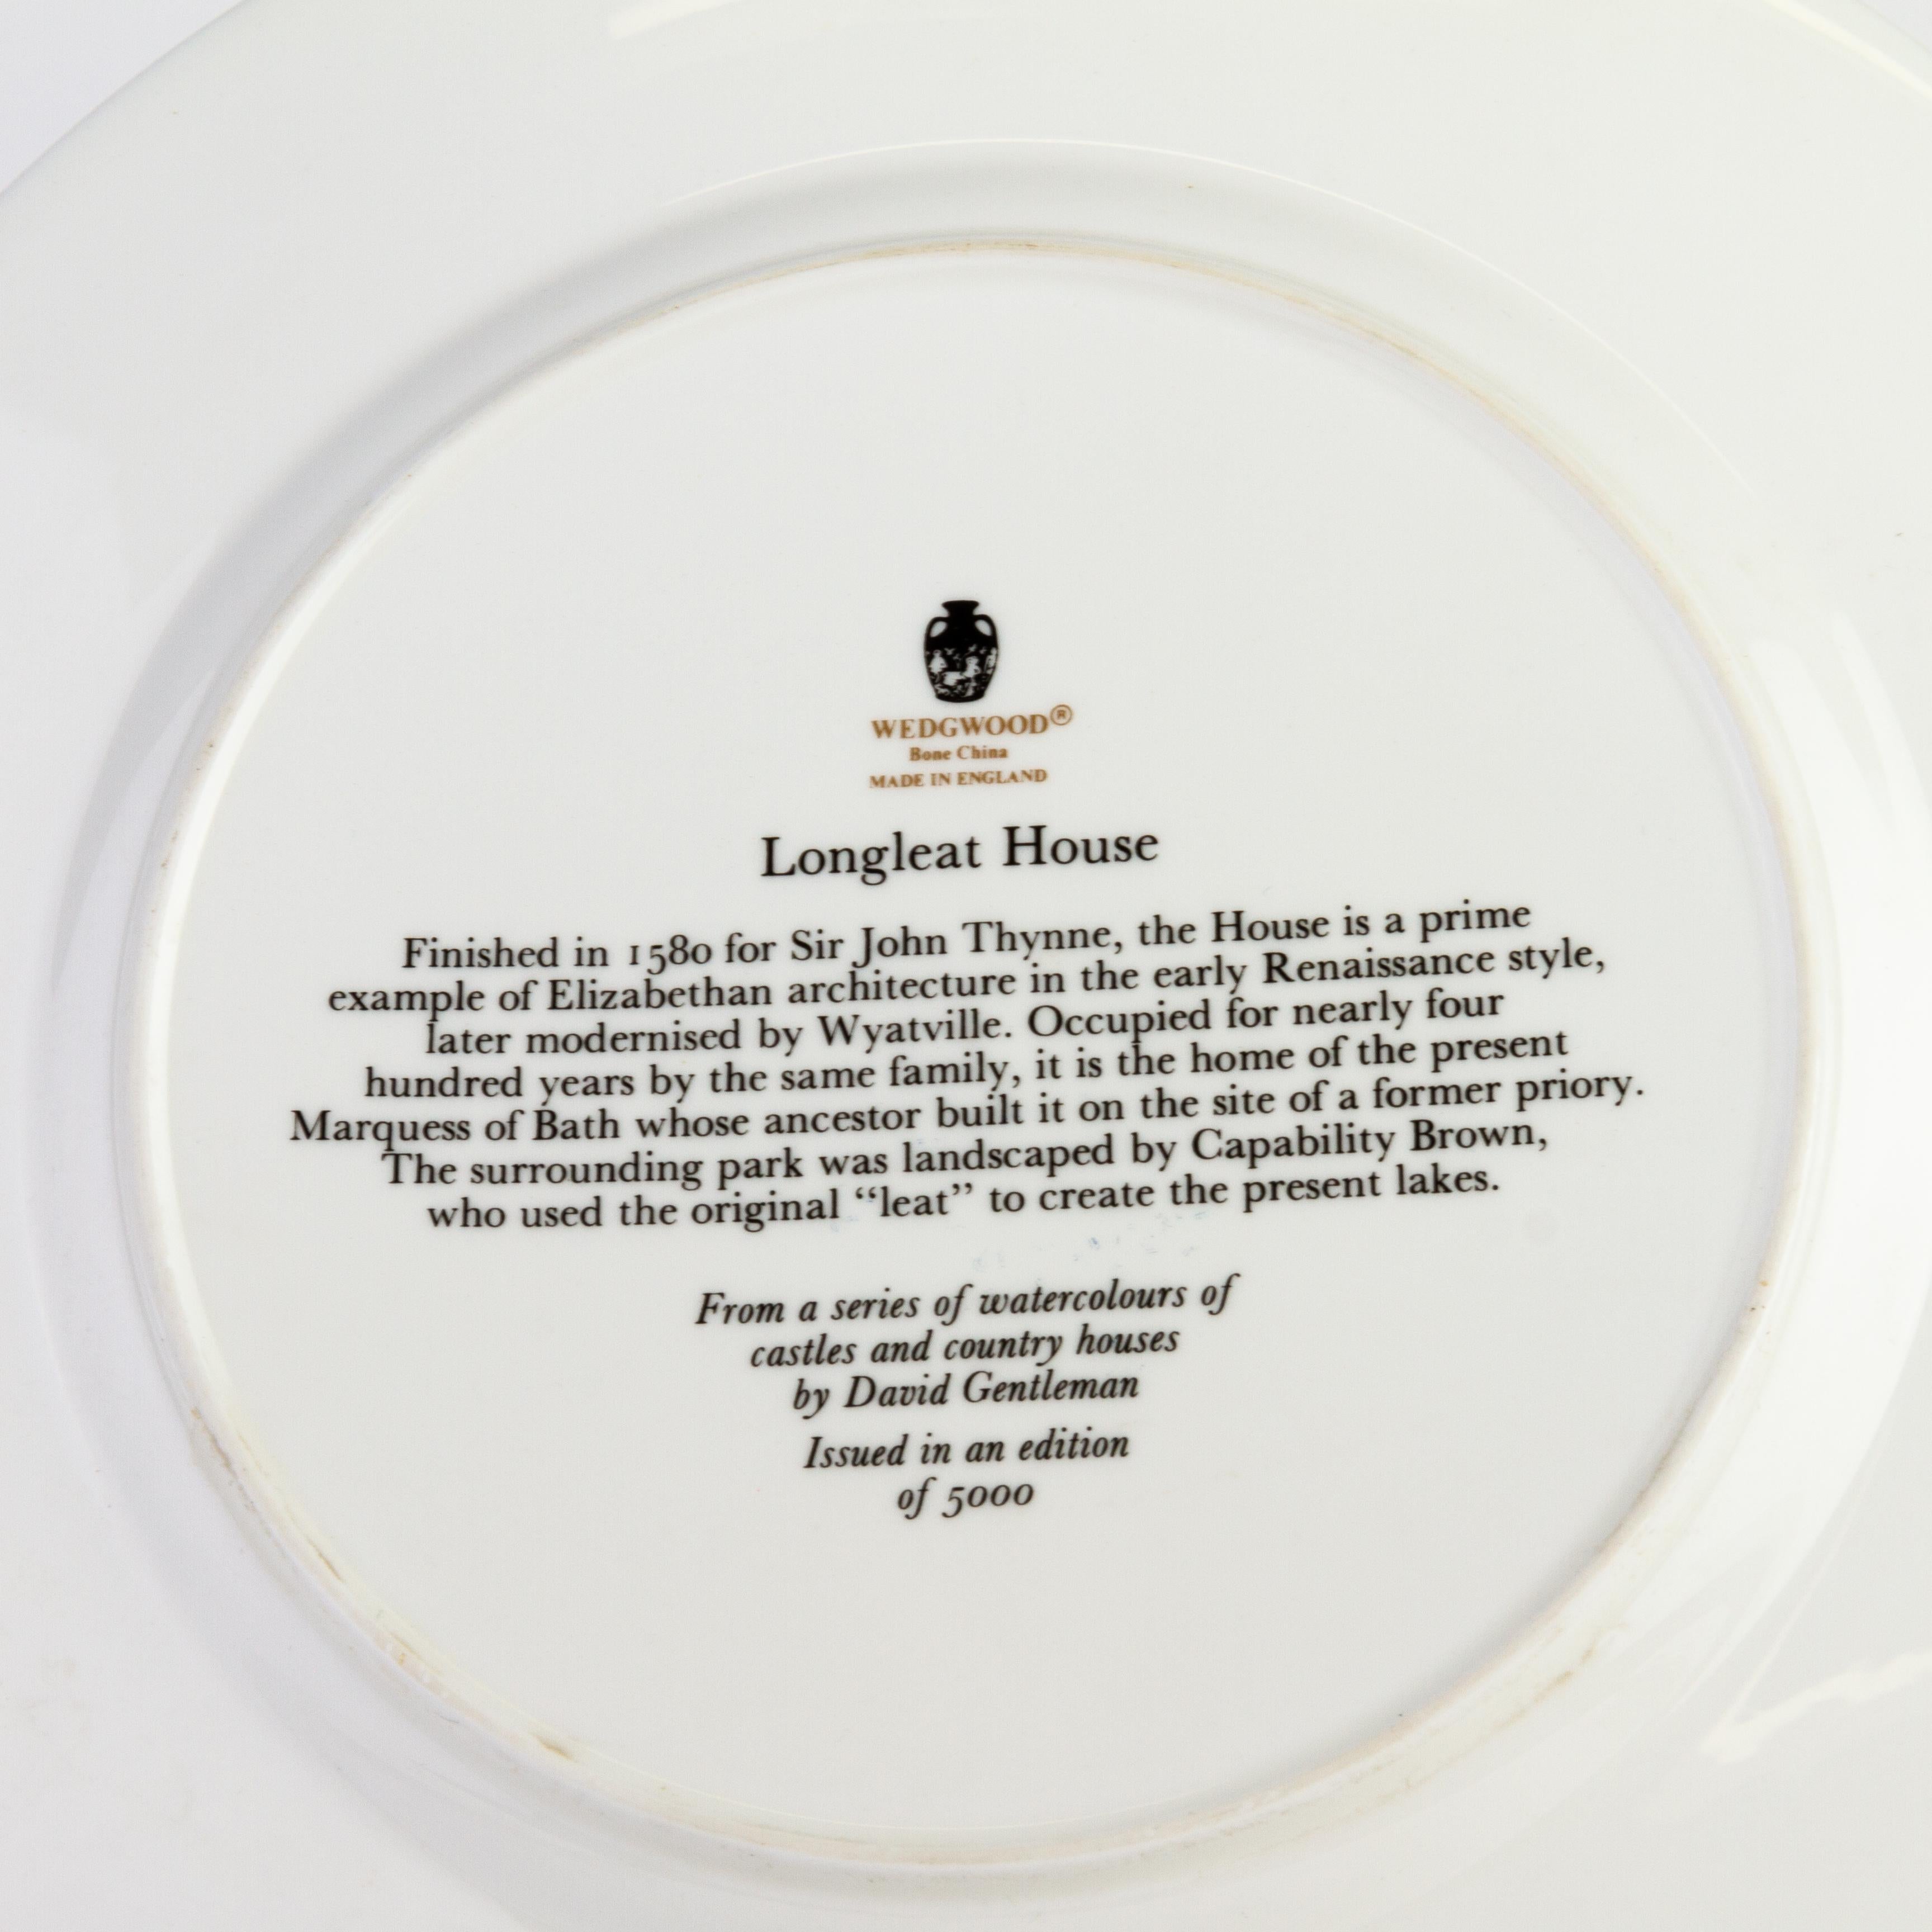 Wedgwood Fine English Porcelain Plate Depicting Longleat House For Sale 2